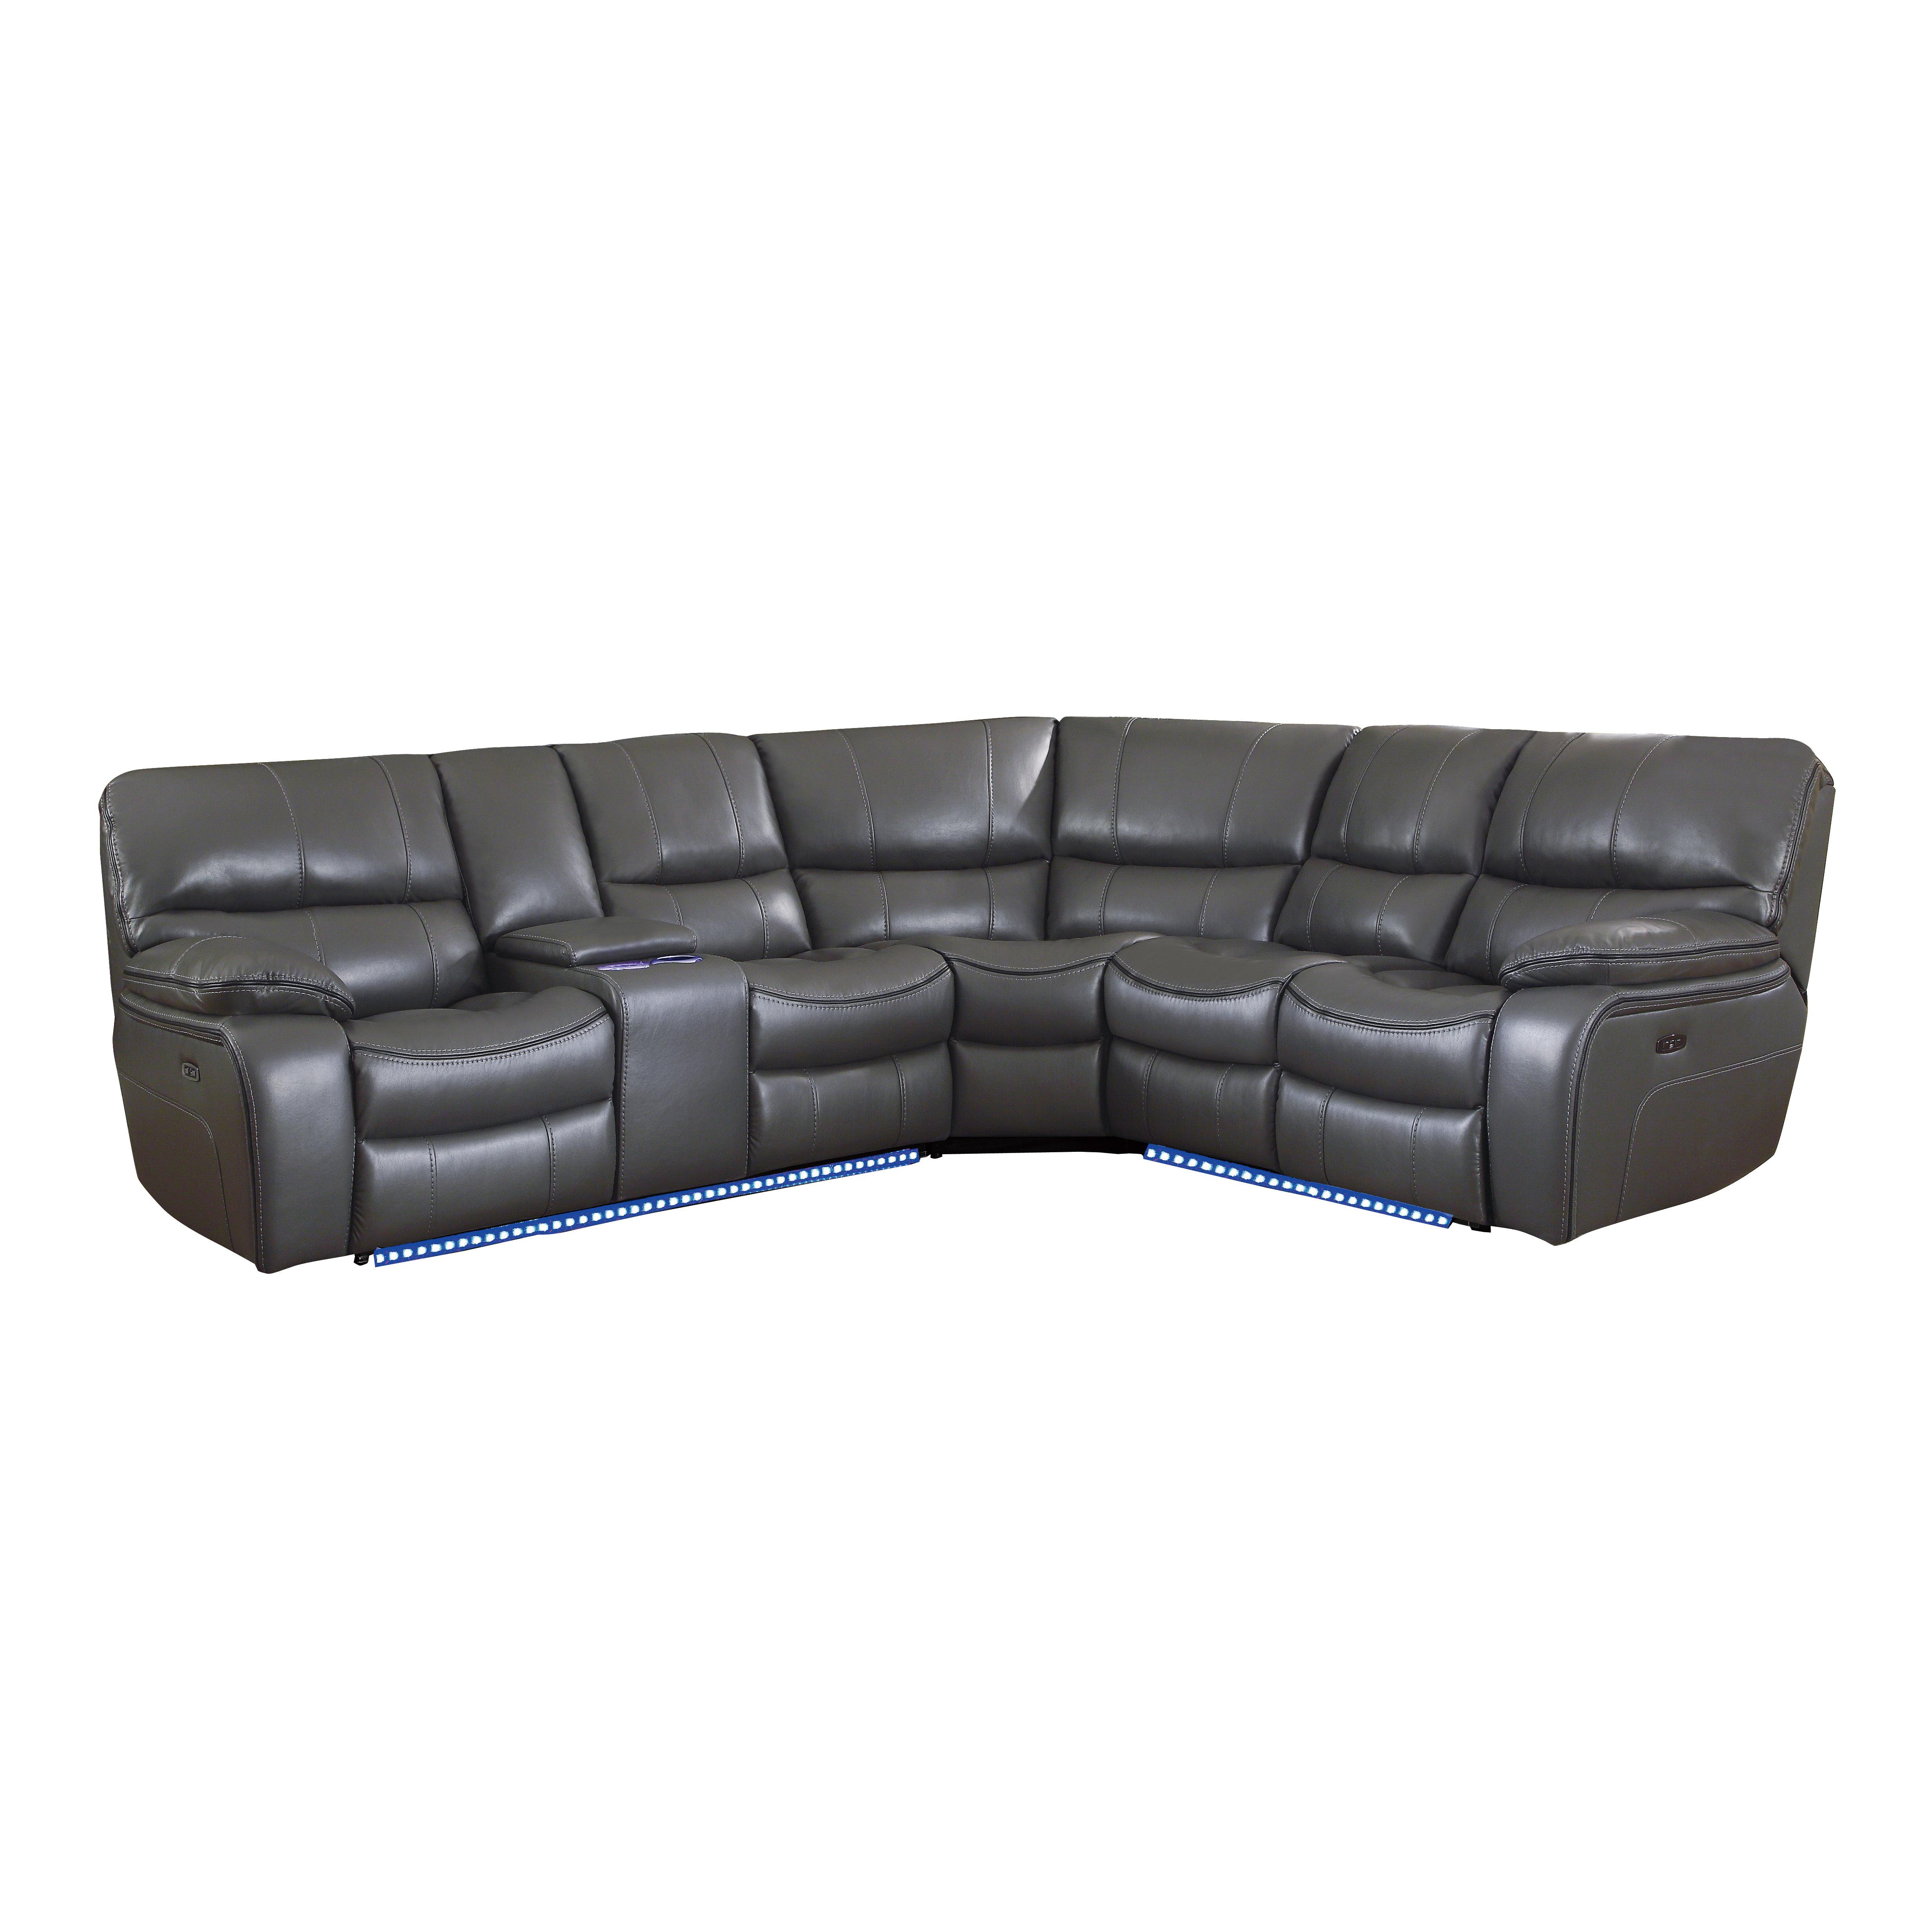 Modern Power Reclining Sectional 8480GRY*3SCPD Pecos 8480GRY*3SCPD in Gray Faux Leather